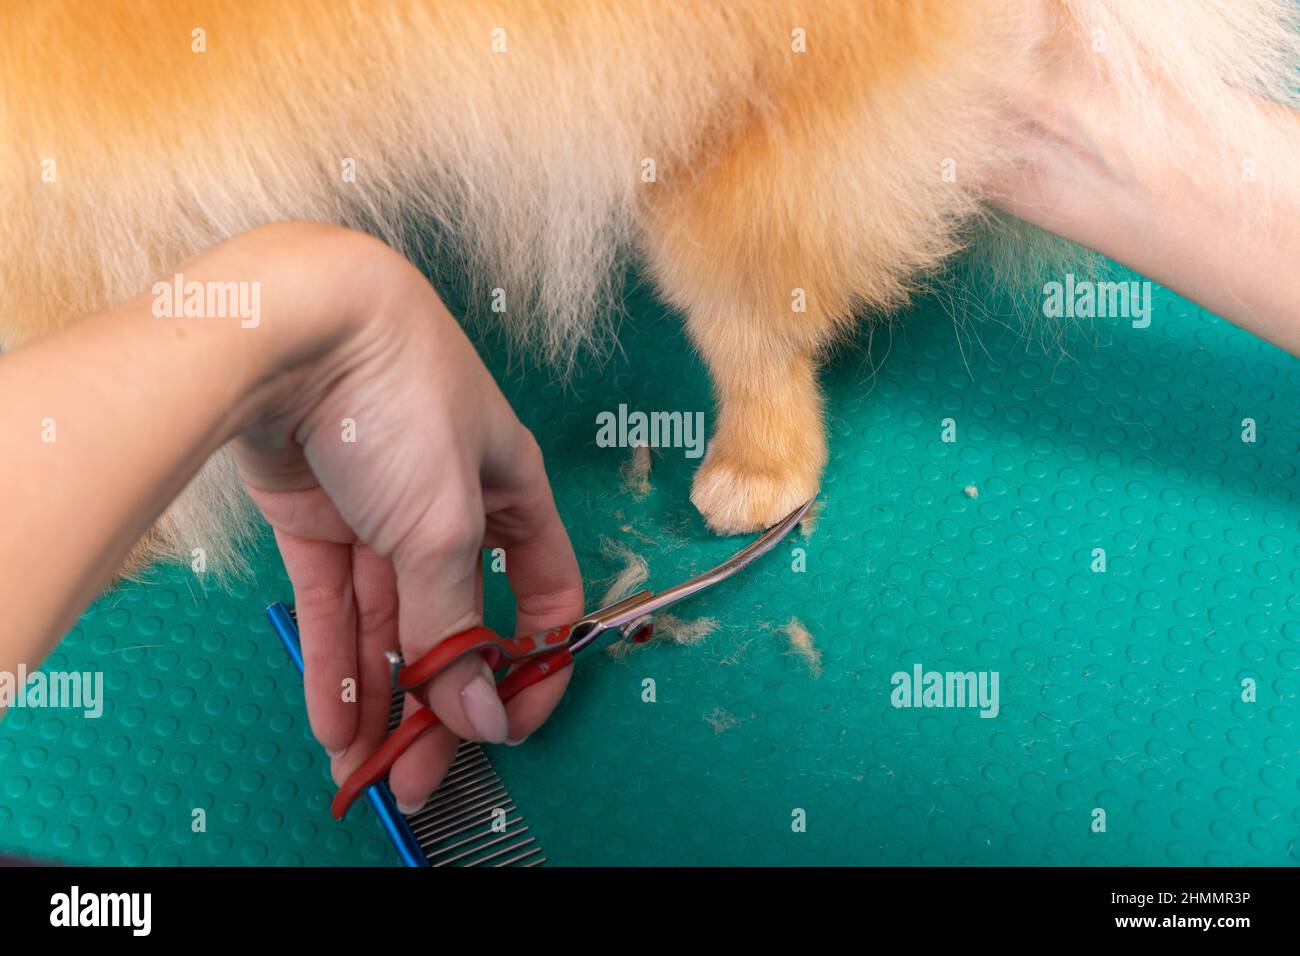 Professional groomer takes care of Orange Pomeranian Spitz in animal beauty salon. Grooming salon worker cuts hair on decorative toy dog paw in close Stock Photo